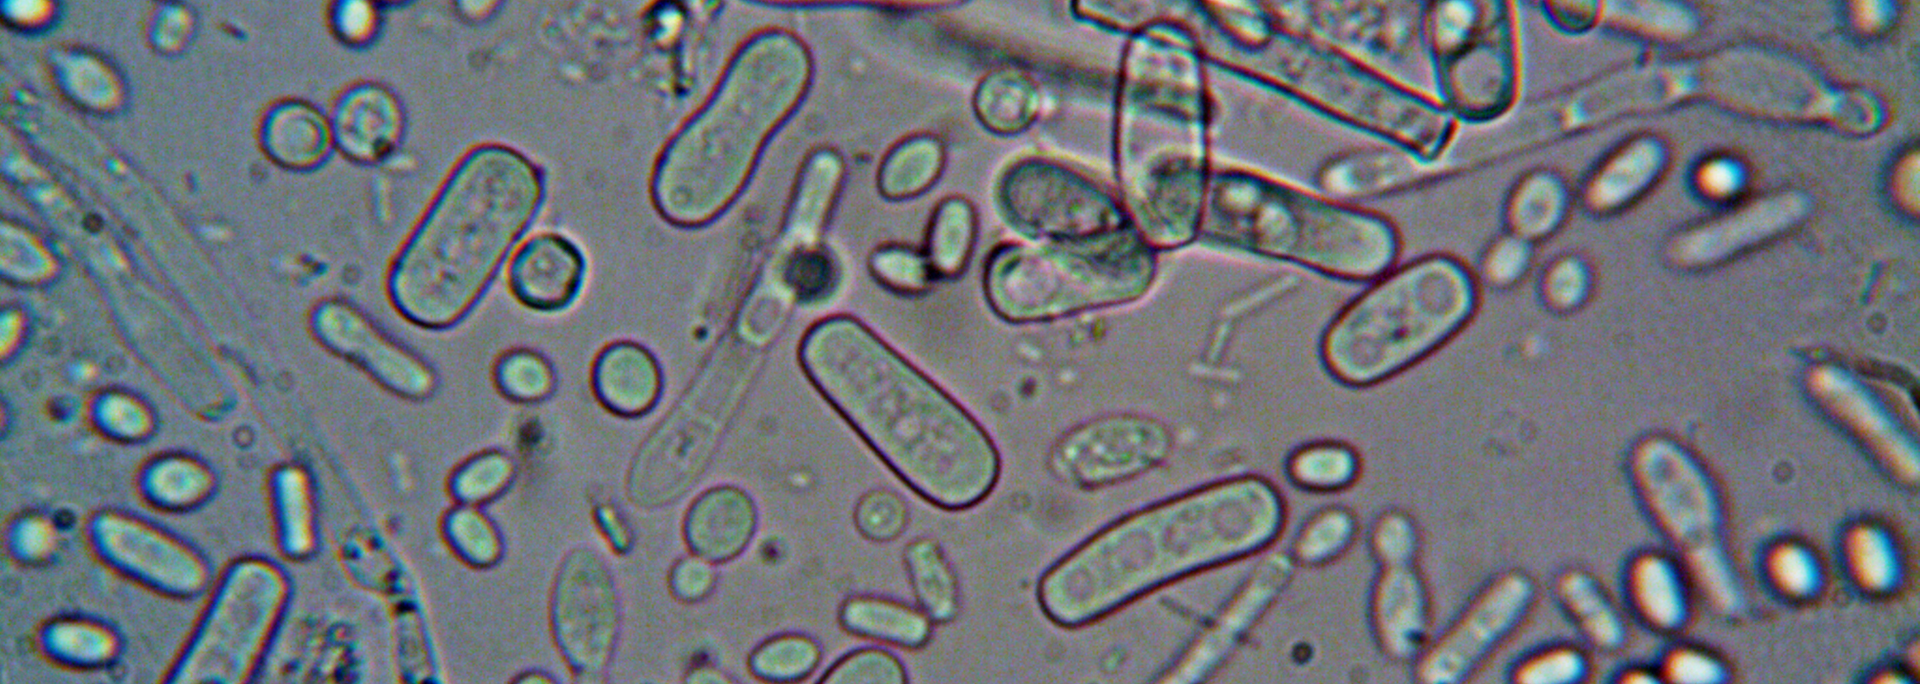 Picture of Bacteria under a microscope